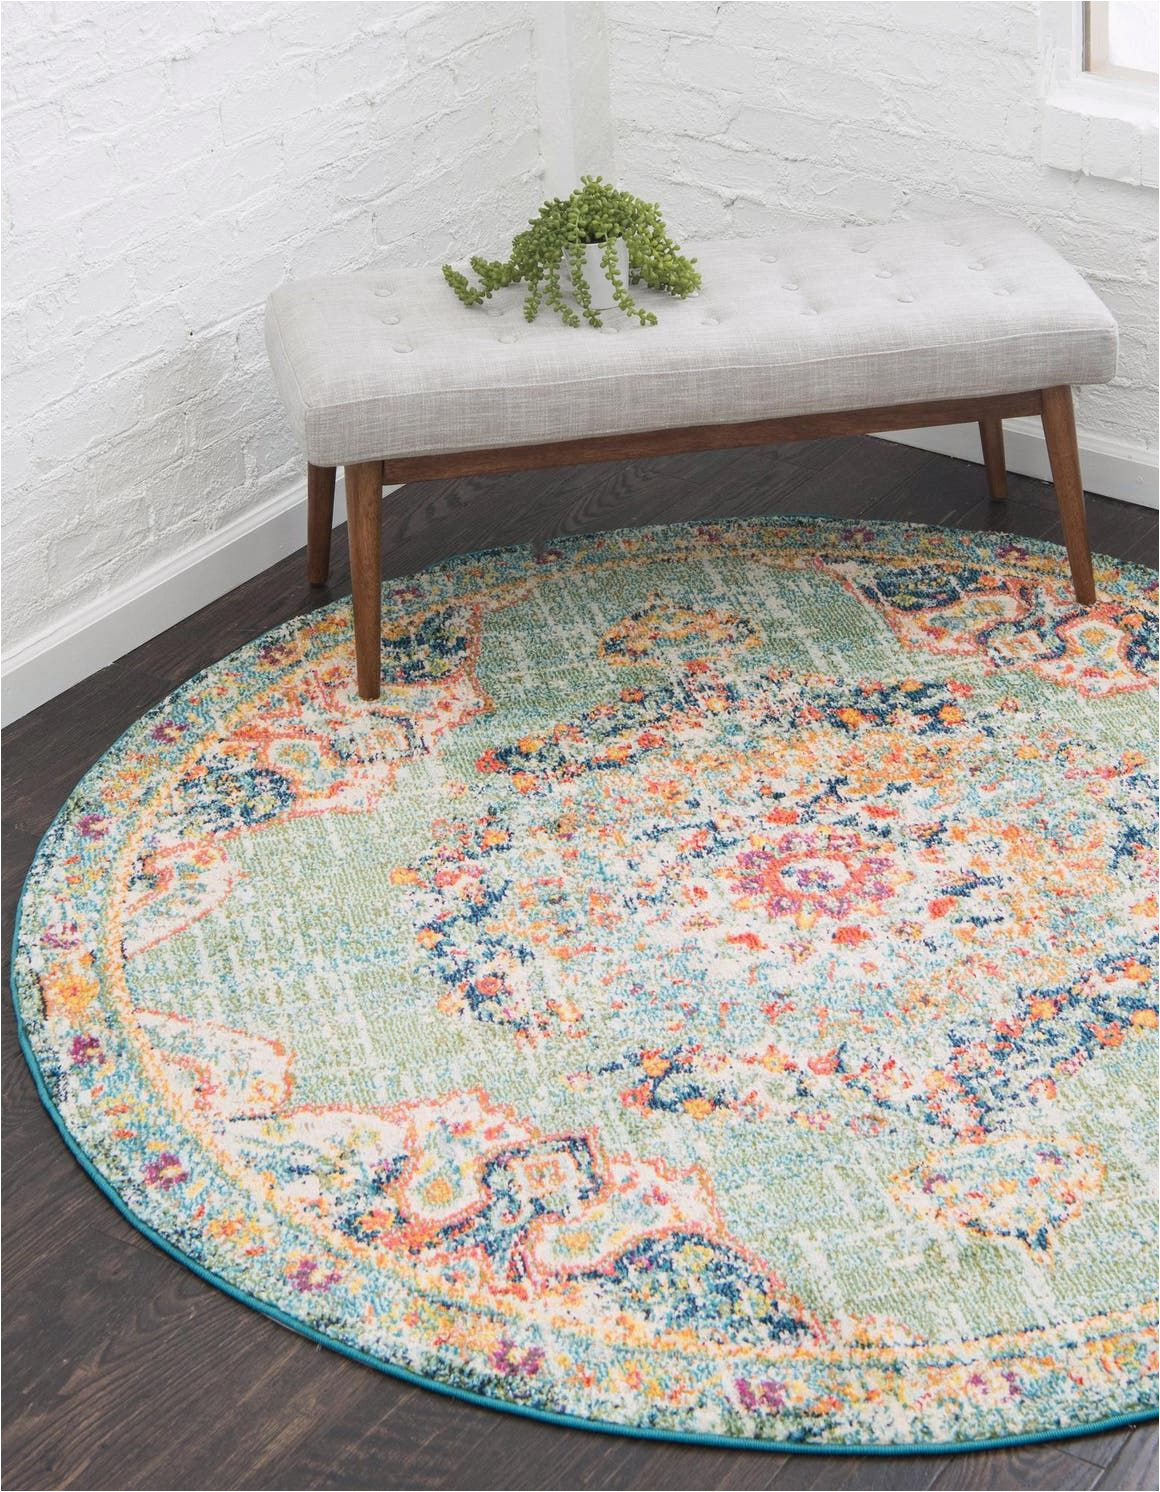 Bed Bath and Beyond Round Rugs Green 3 3 X 3 3 Madeline Round Rug Rugs Com Round Rug